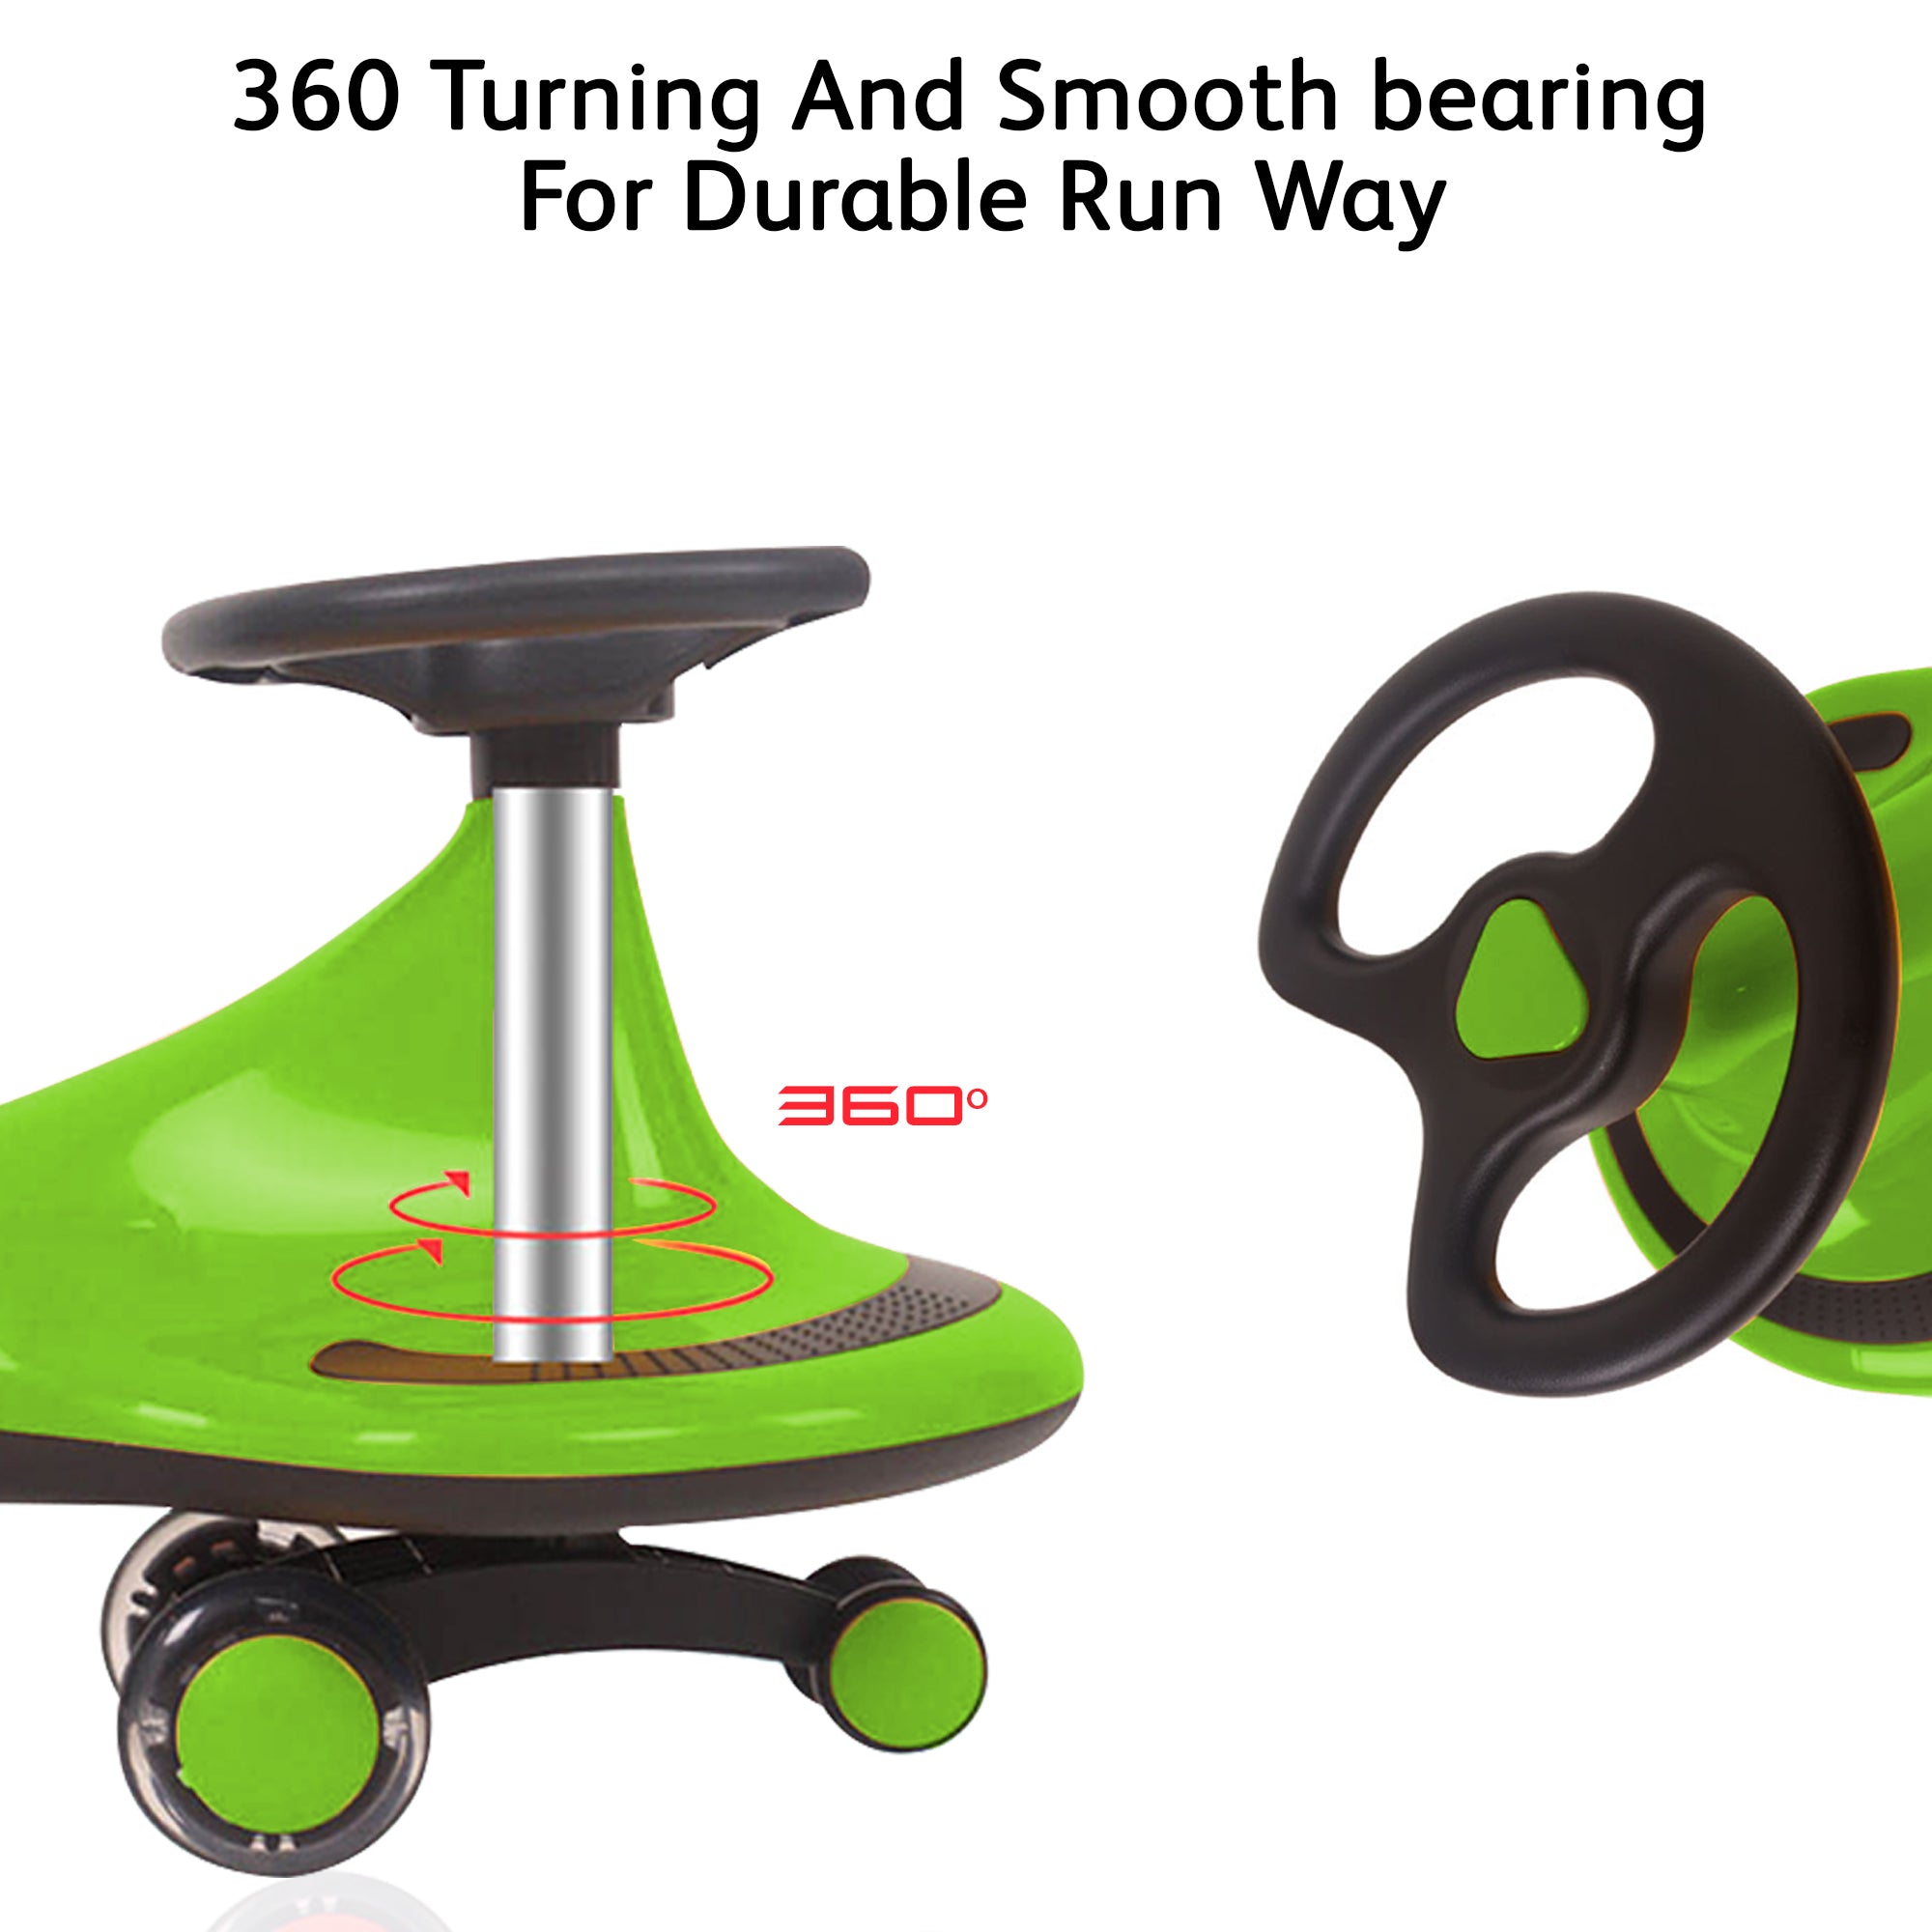 Tygatec Ride On Swing Car for Kids ( Green Color )